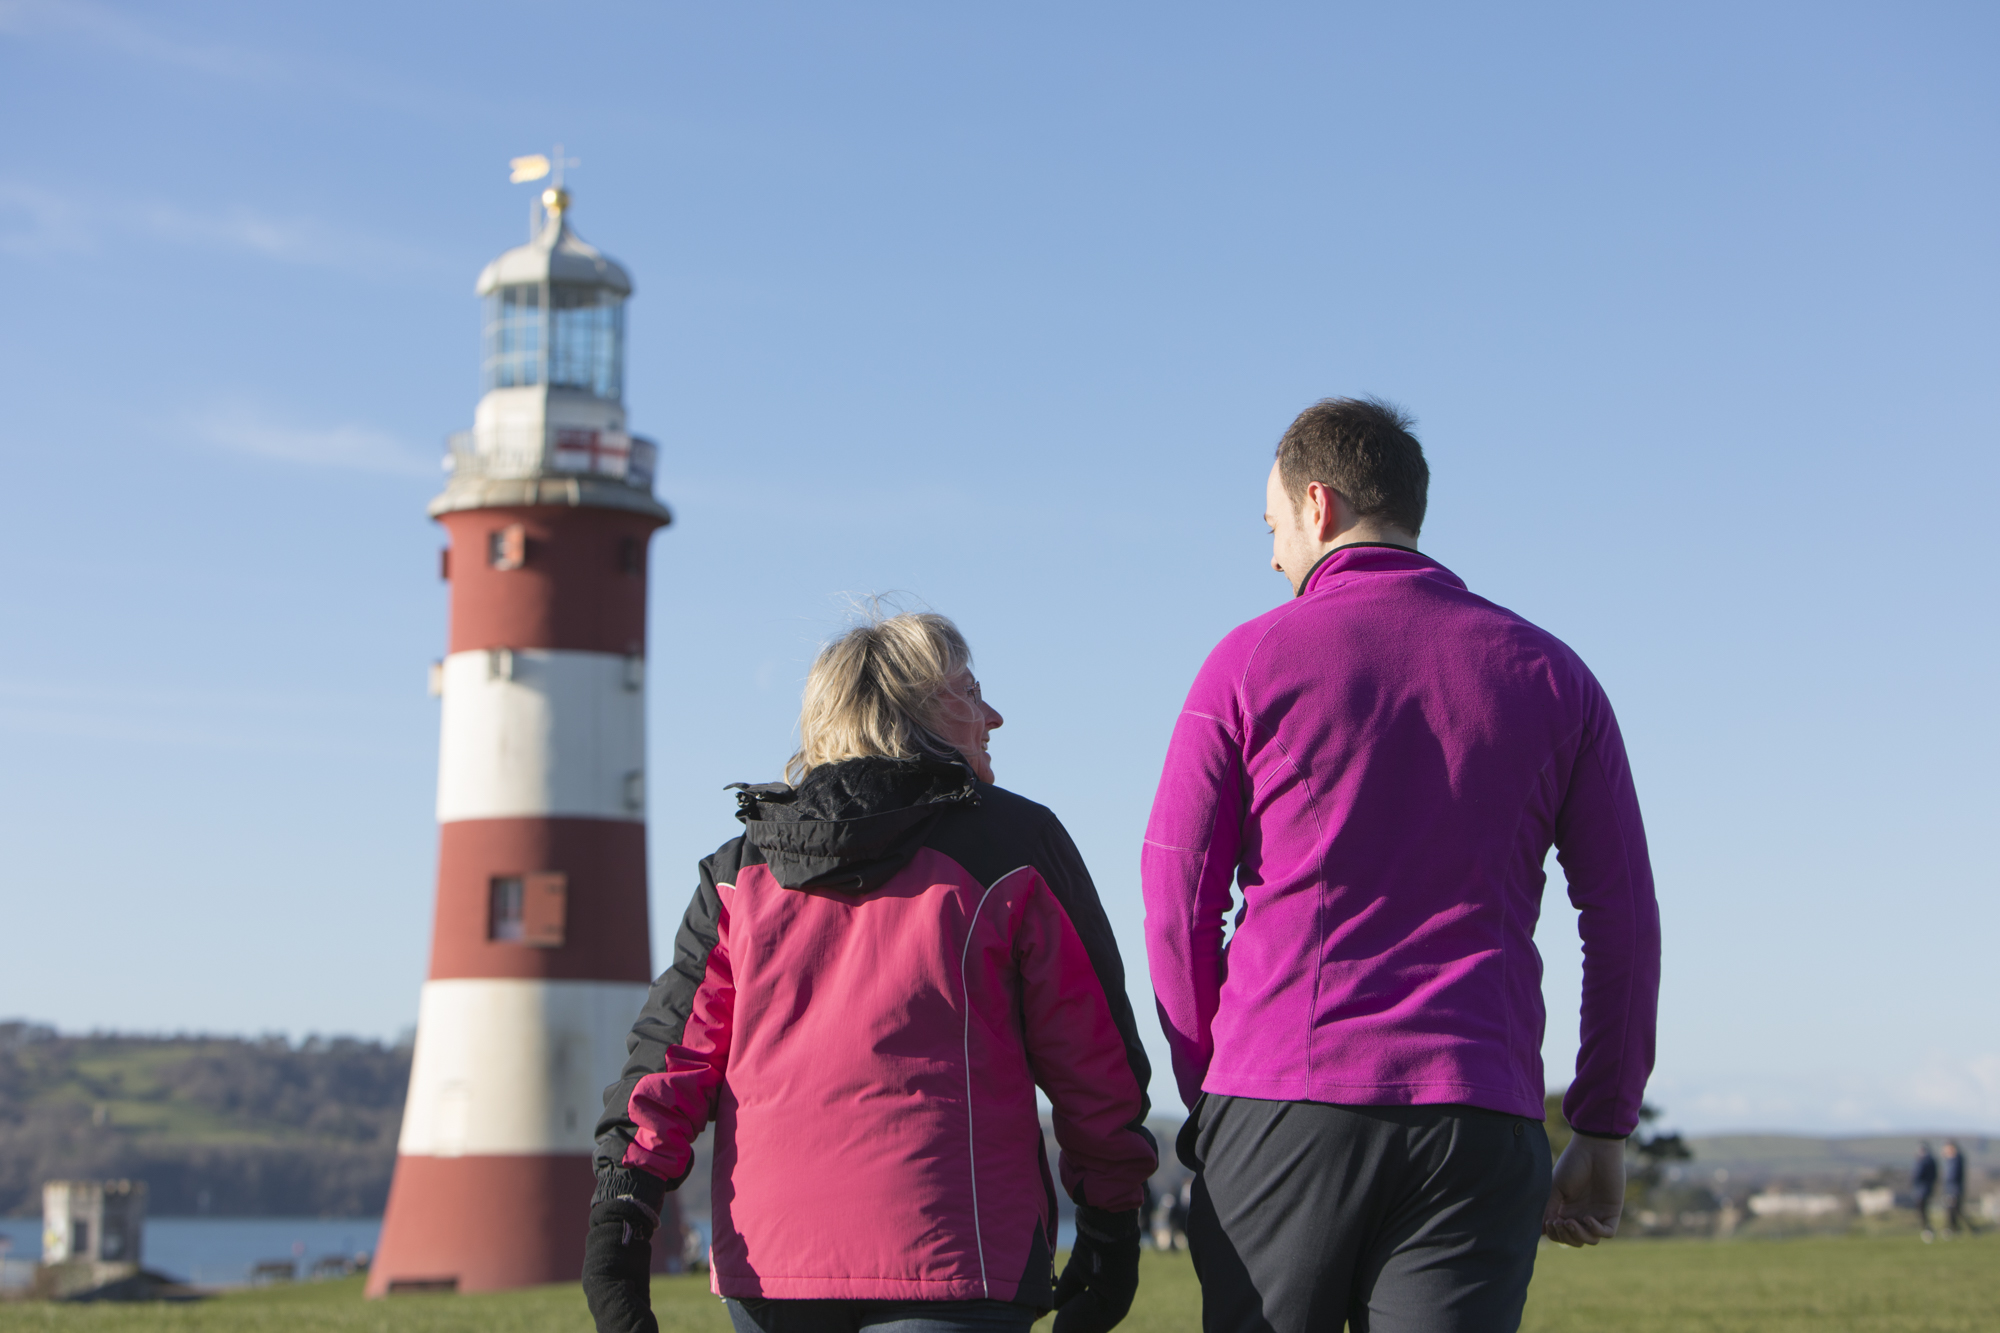 two people walking along with lighthouse tower in the background